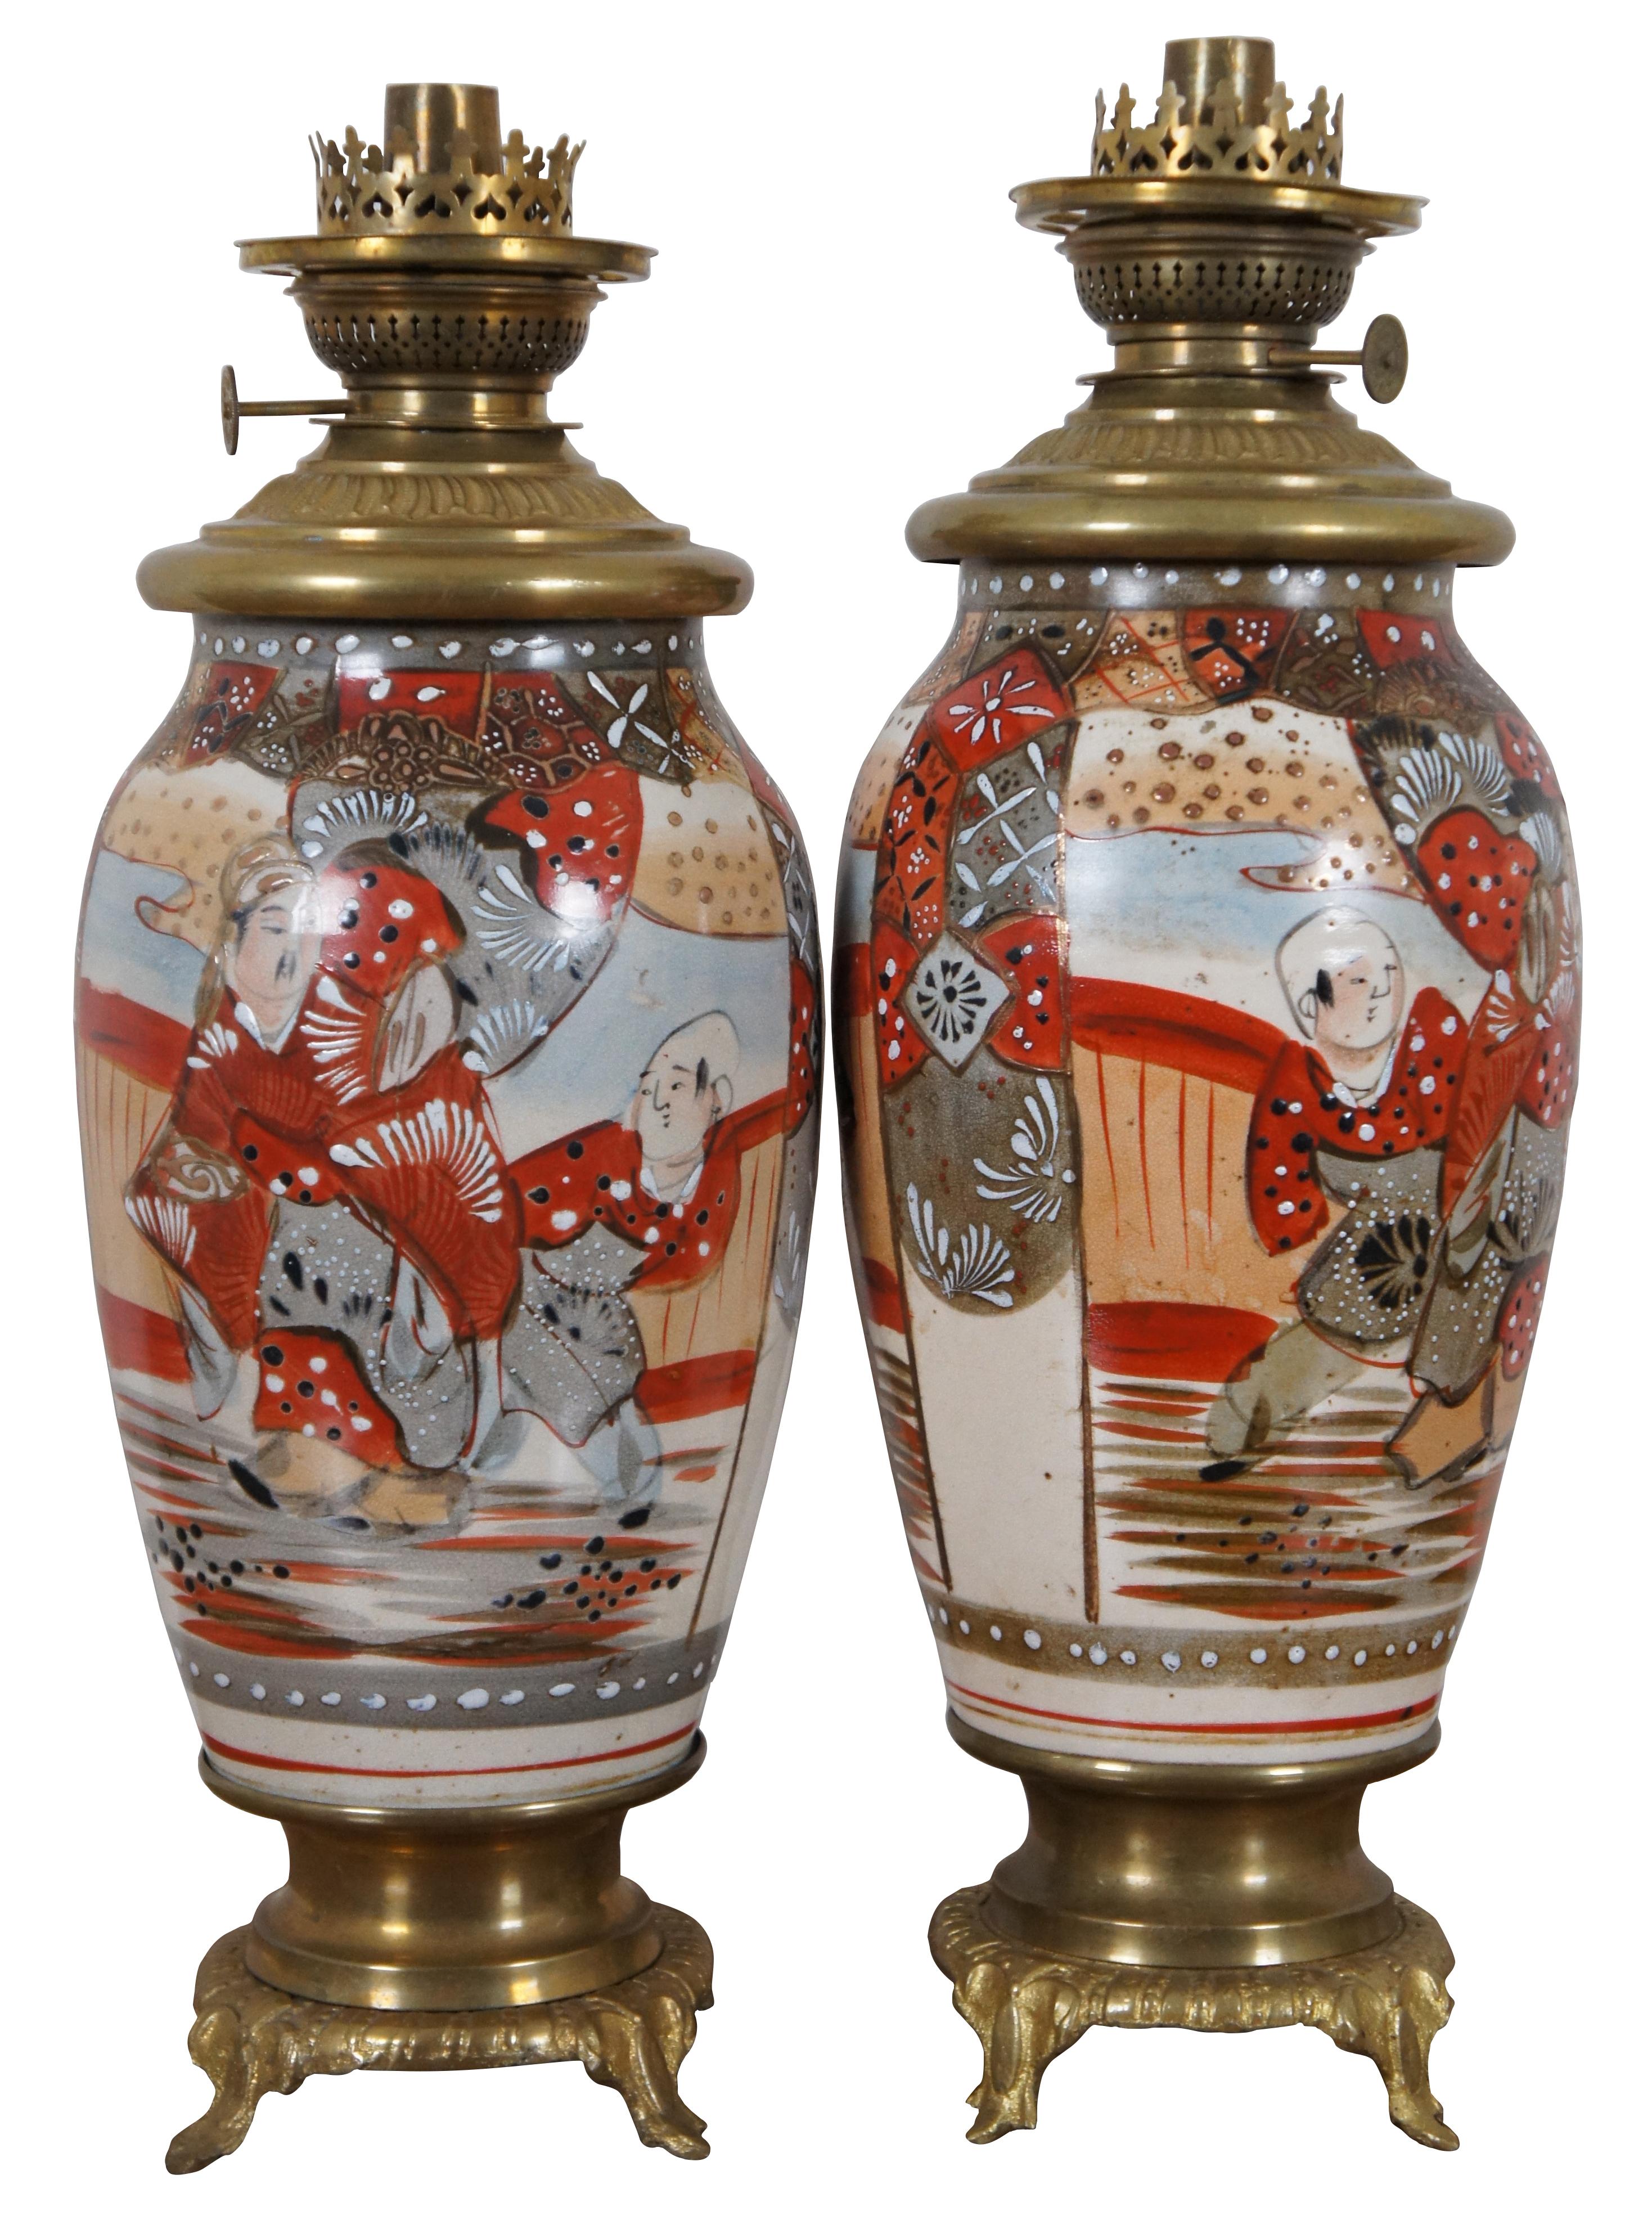 Antique Japanese Satsuma Moriage Oil Lamps & Dragon Jardiniere Mantel Set In Good Condition For Sale In Dayton, OH